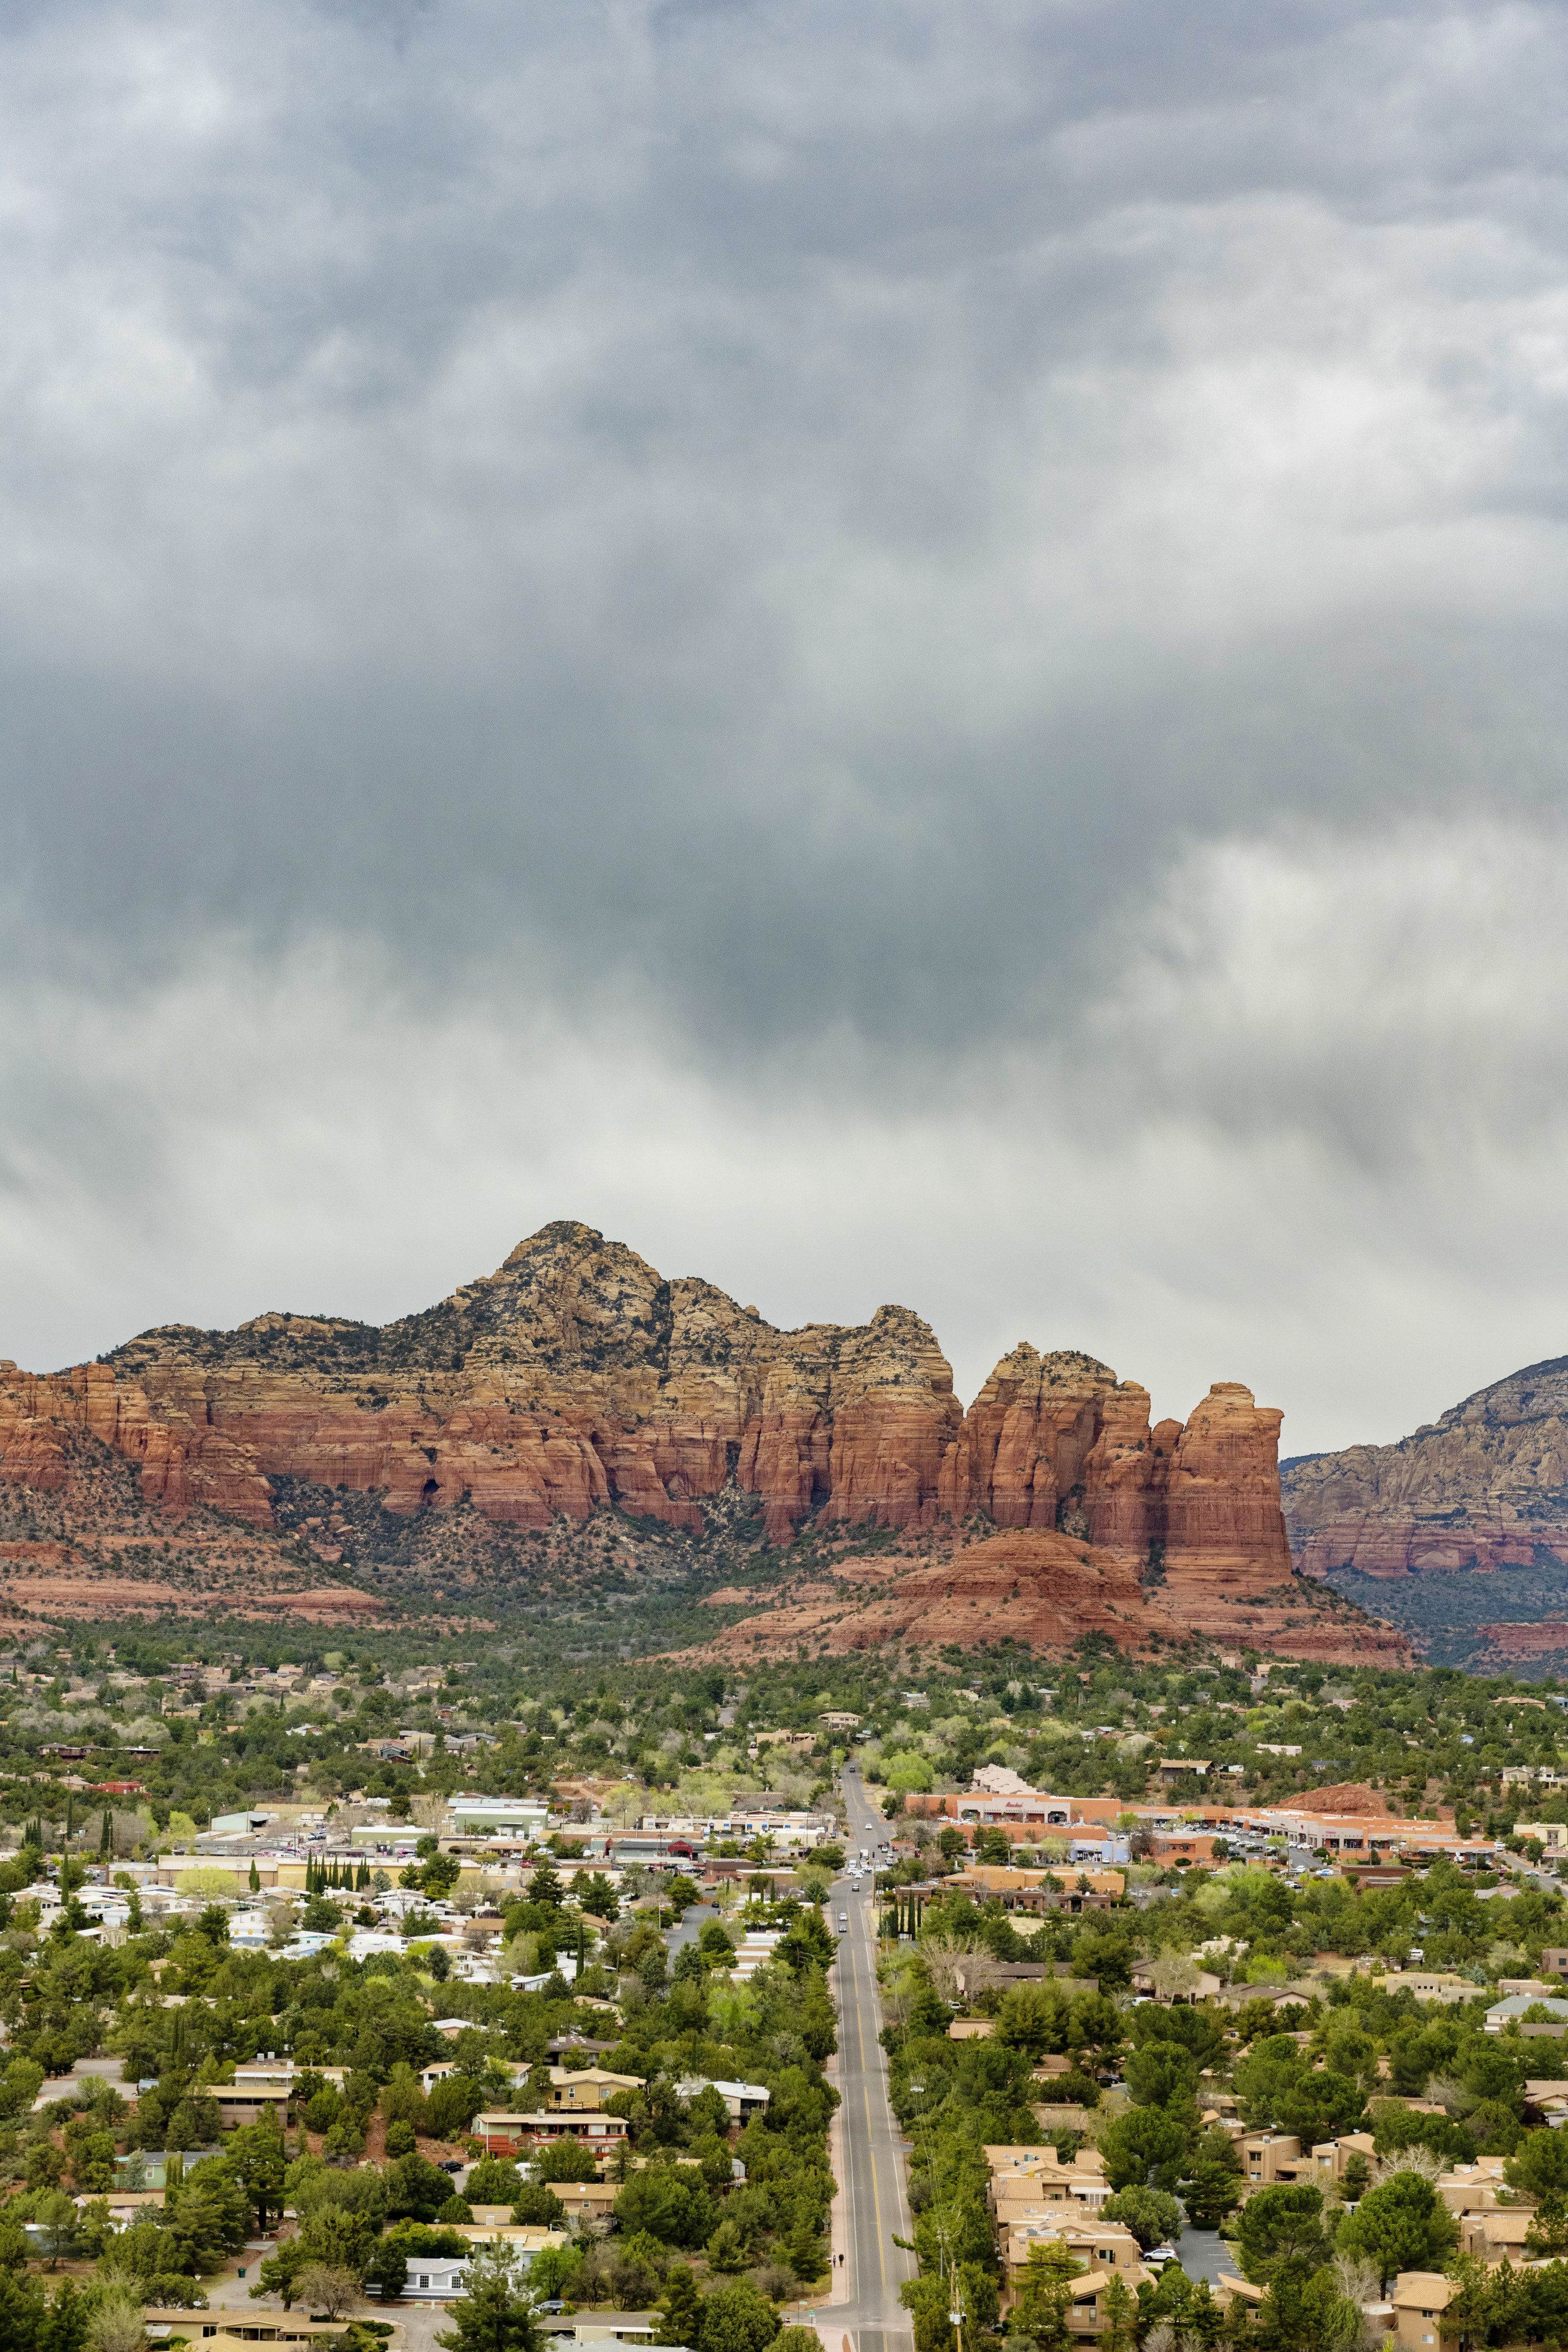 This is a high-angle photograph of a residential neighborhood in the town of Sedona, Arizona in spring time